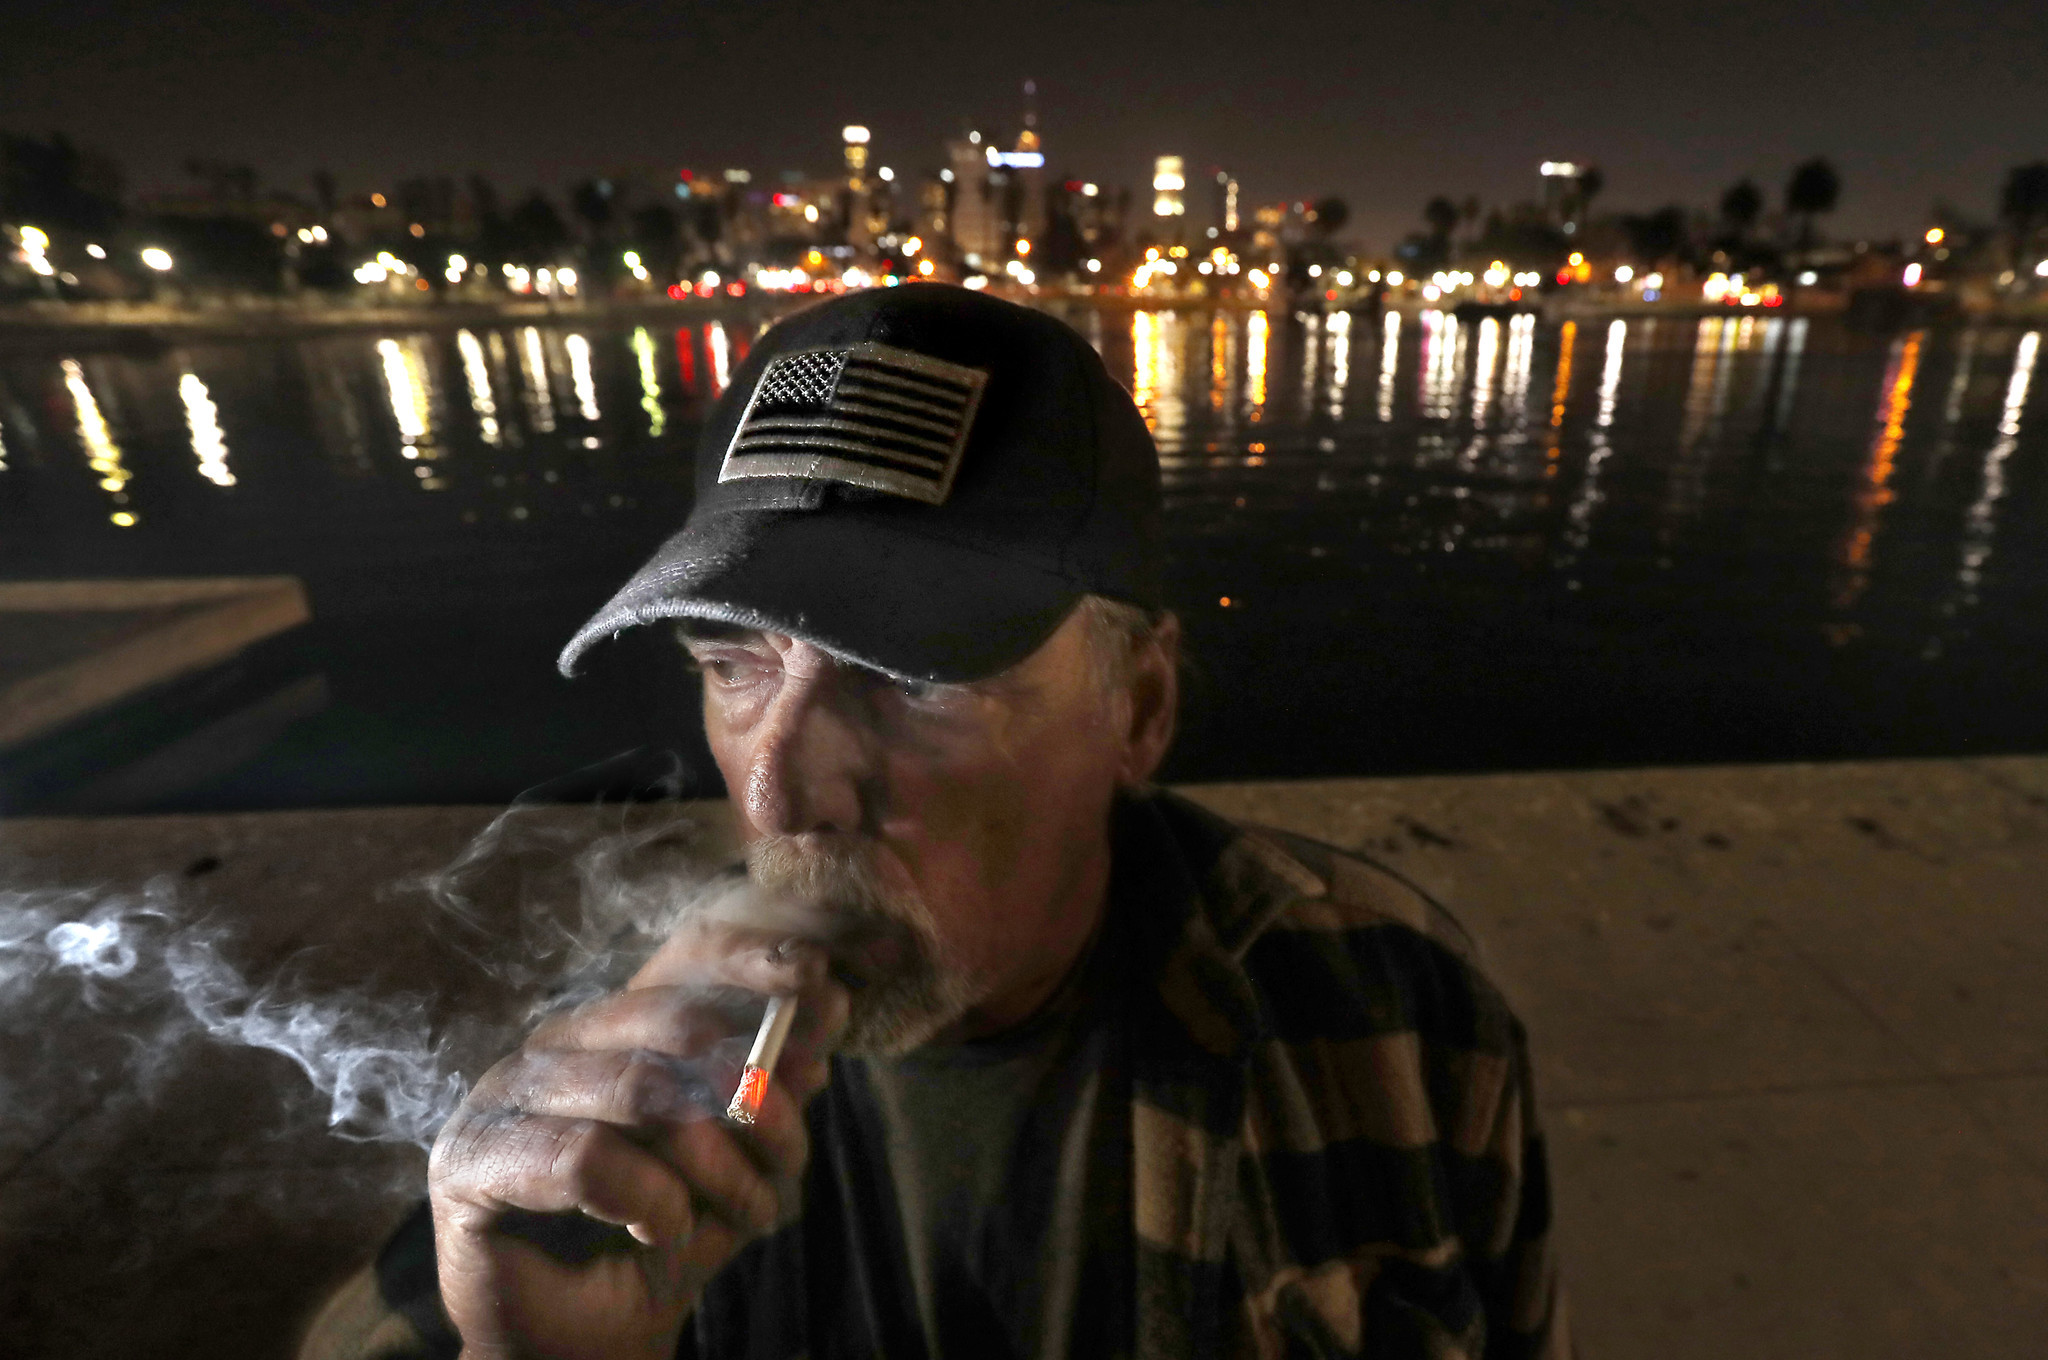 LOS ANGELES, CALIF. - AUG. 1, 2018. Jeff Brooks, 63, lives on the shores of MacArthur Park Lake. H